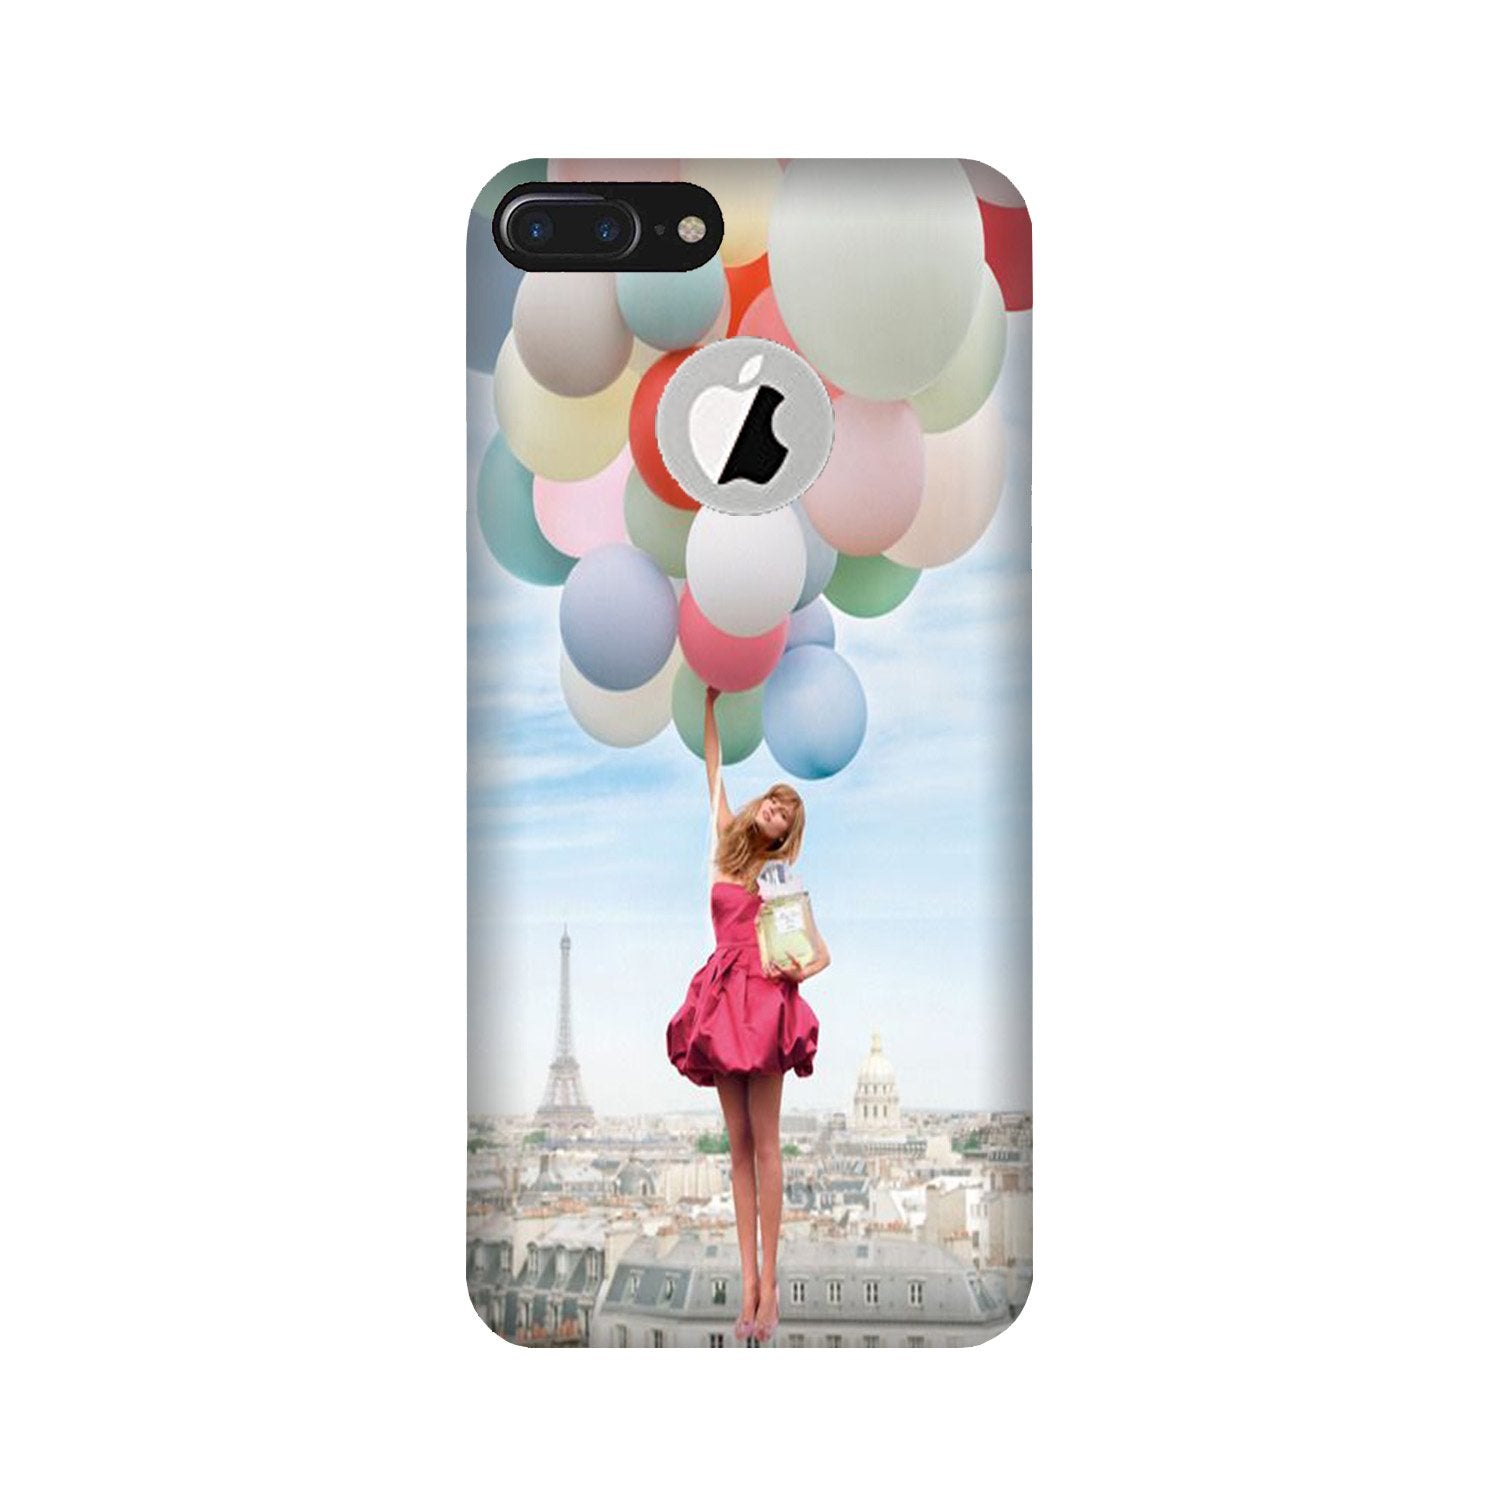 Girl with Baloon Case for iPhone 7 Plus logo cut